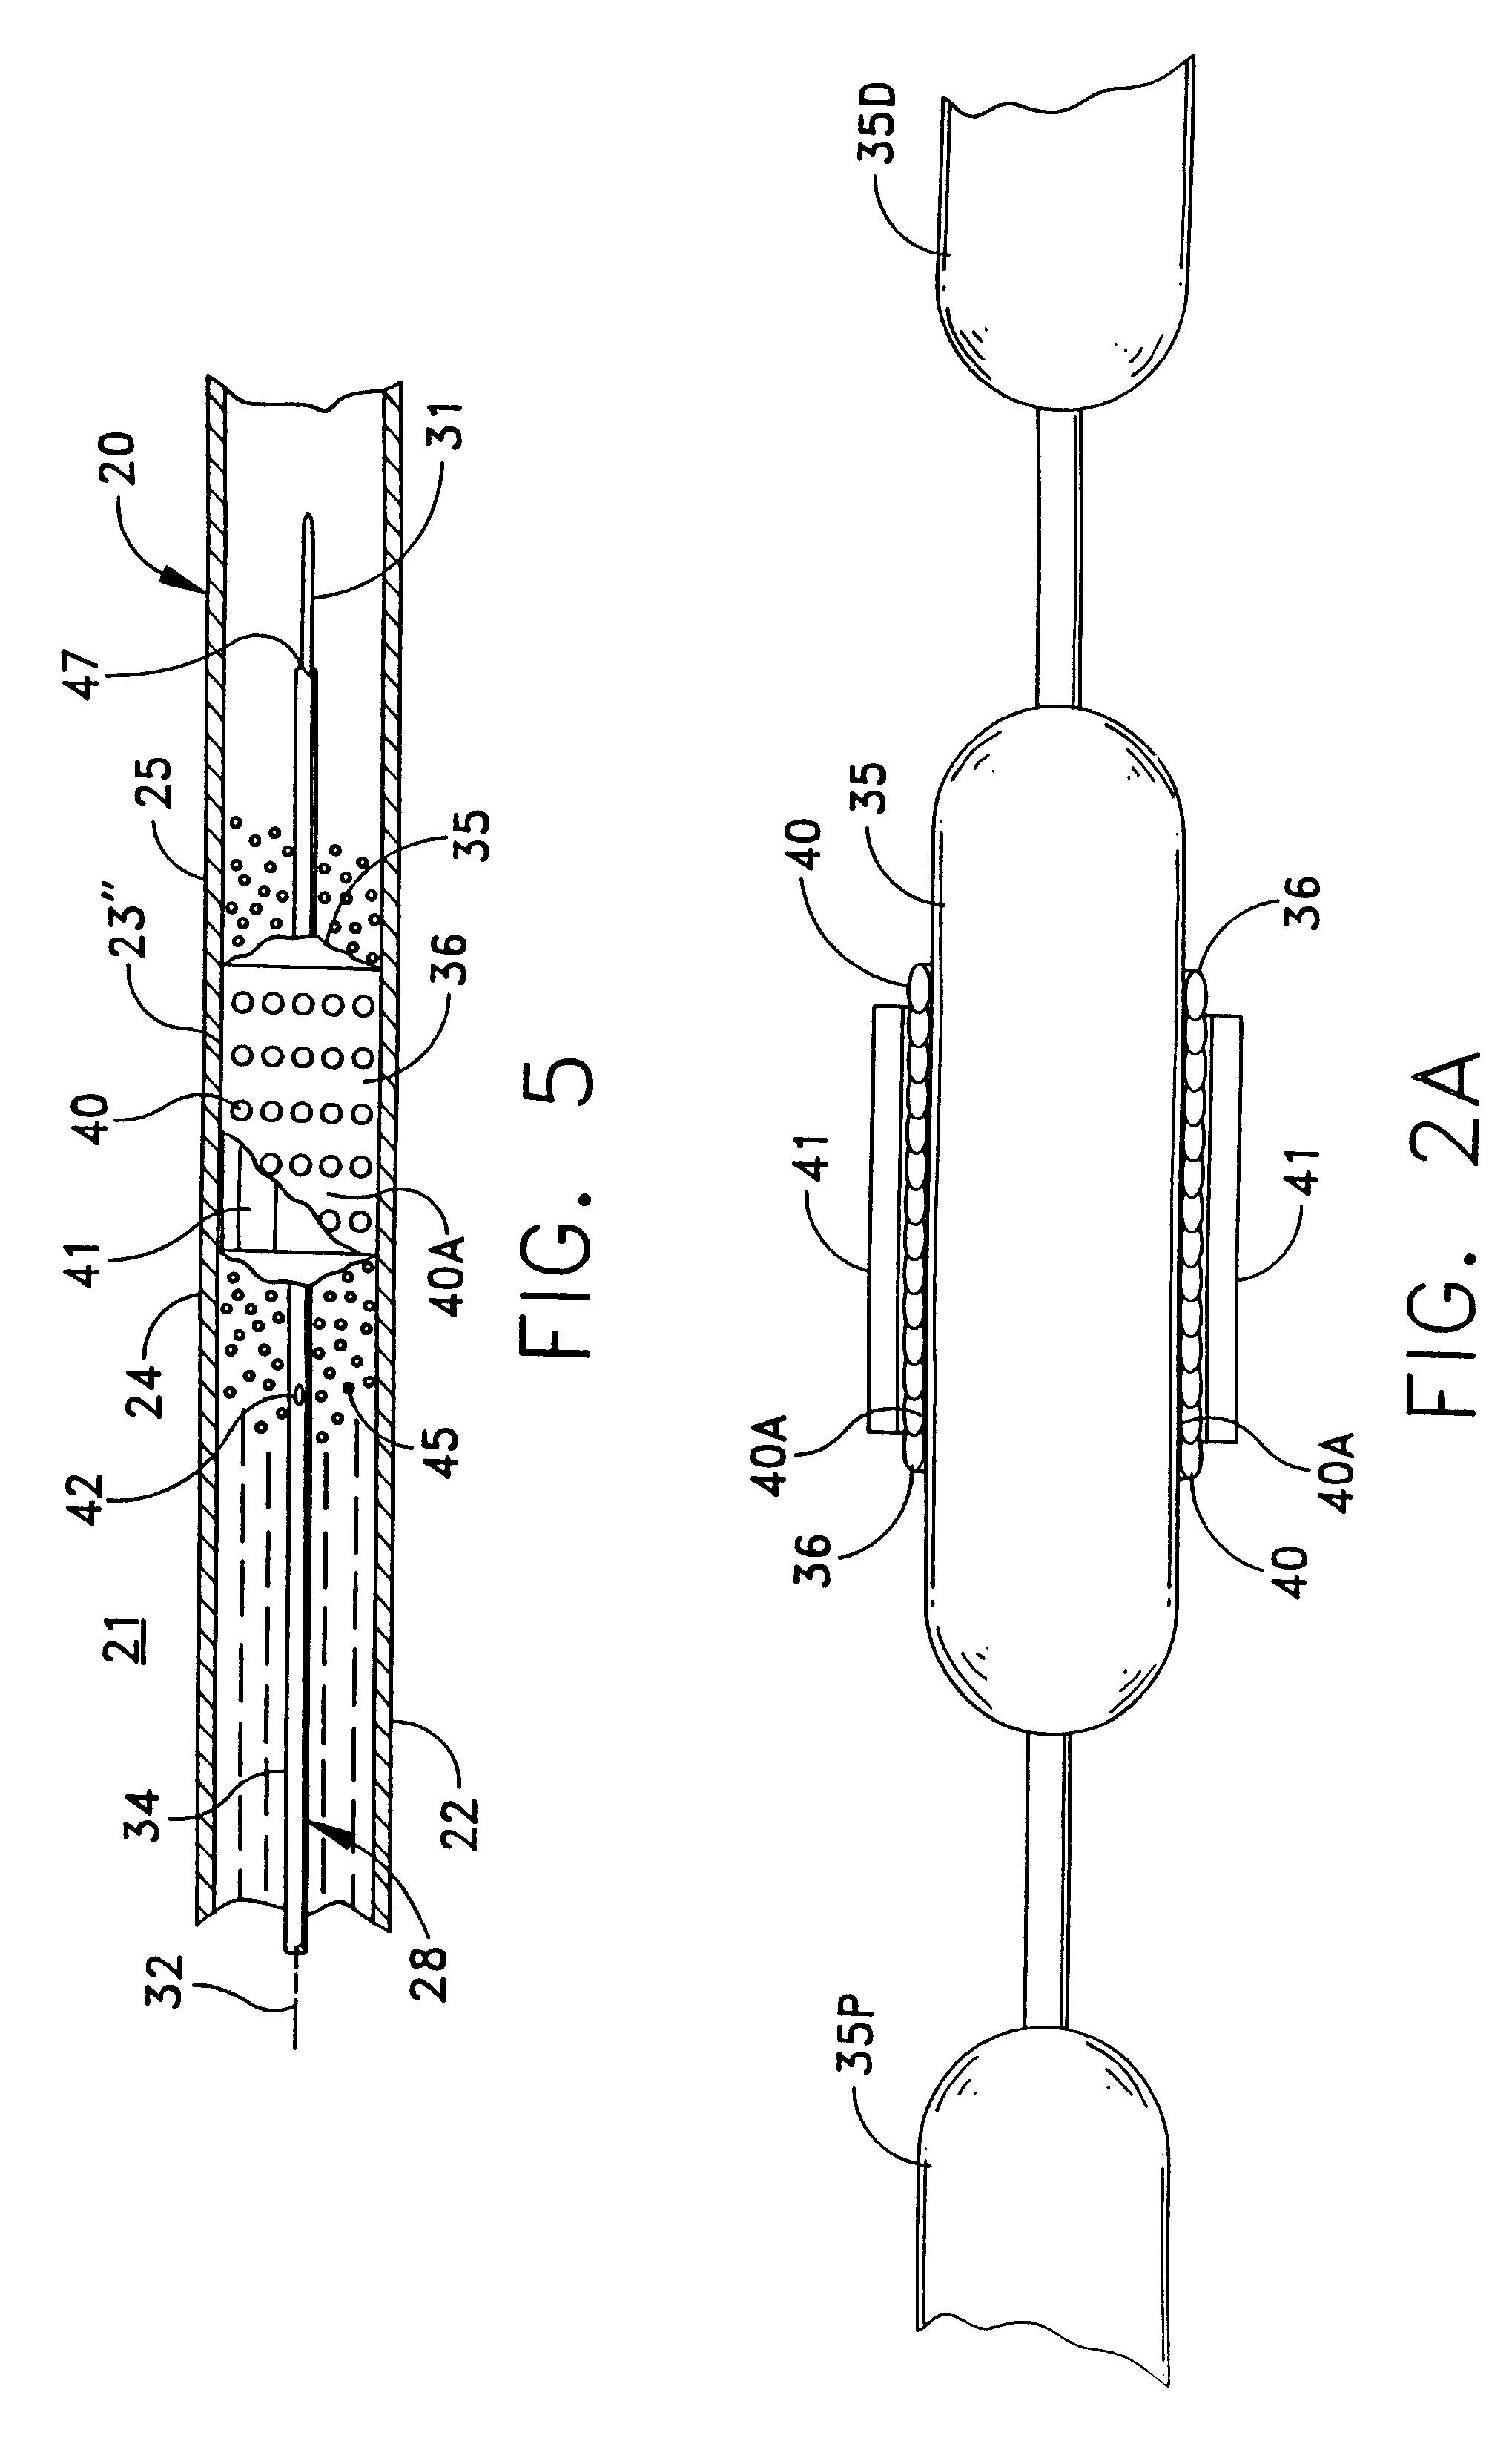 Replenishable stent and delivery system